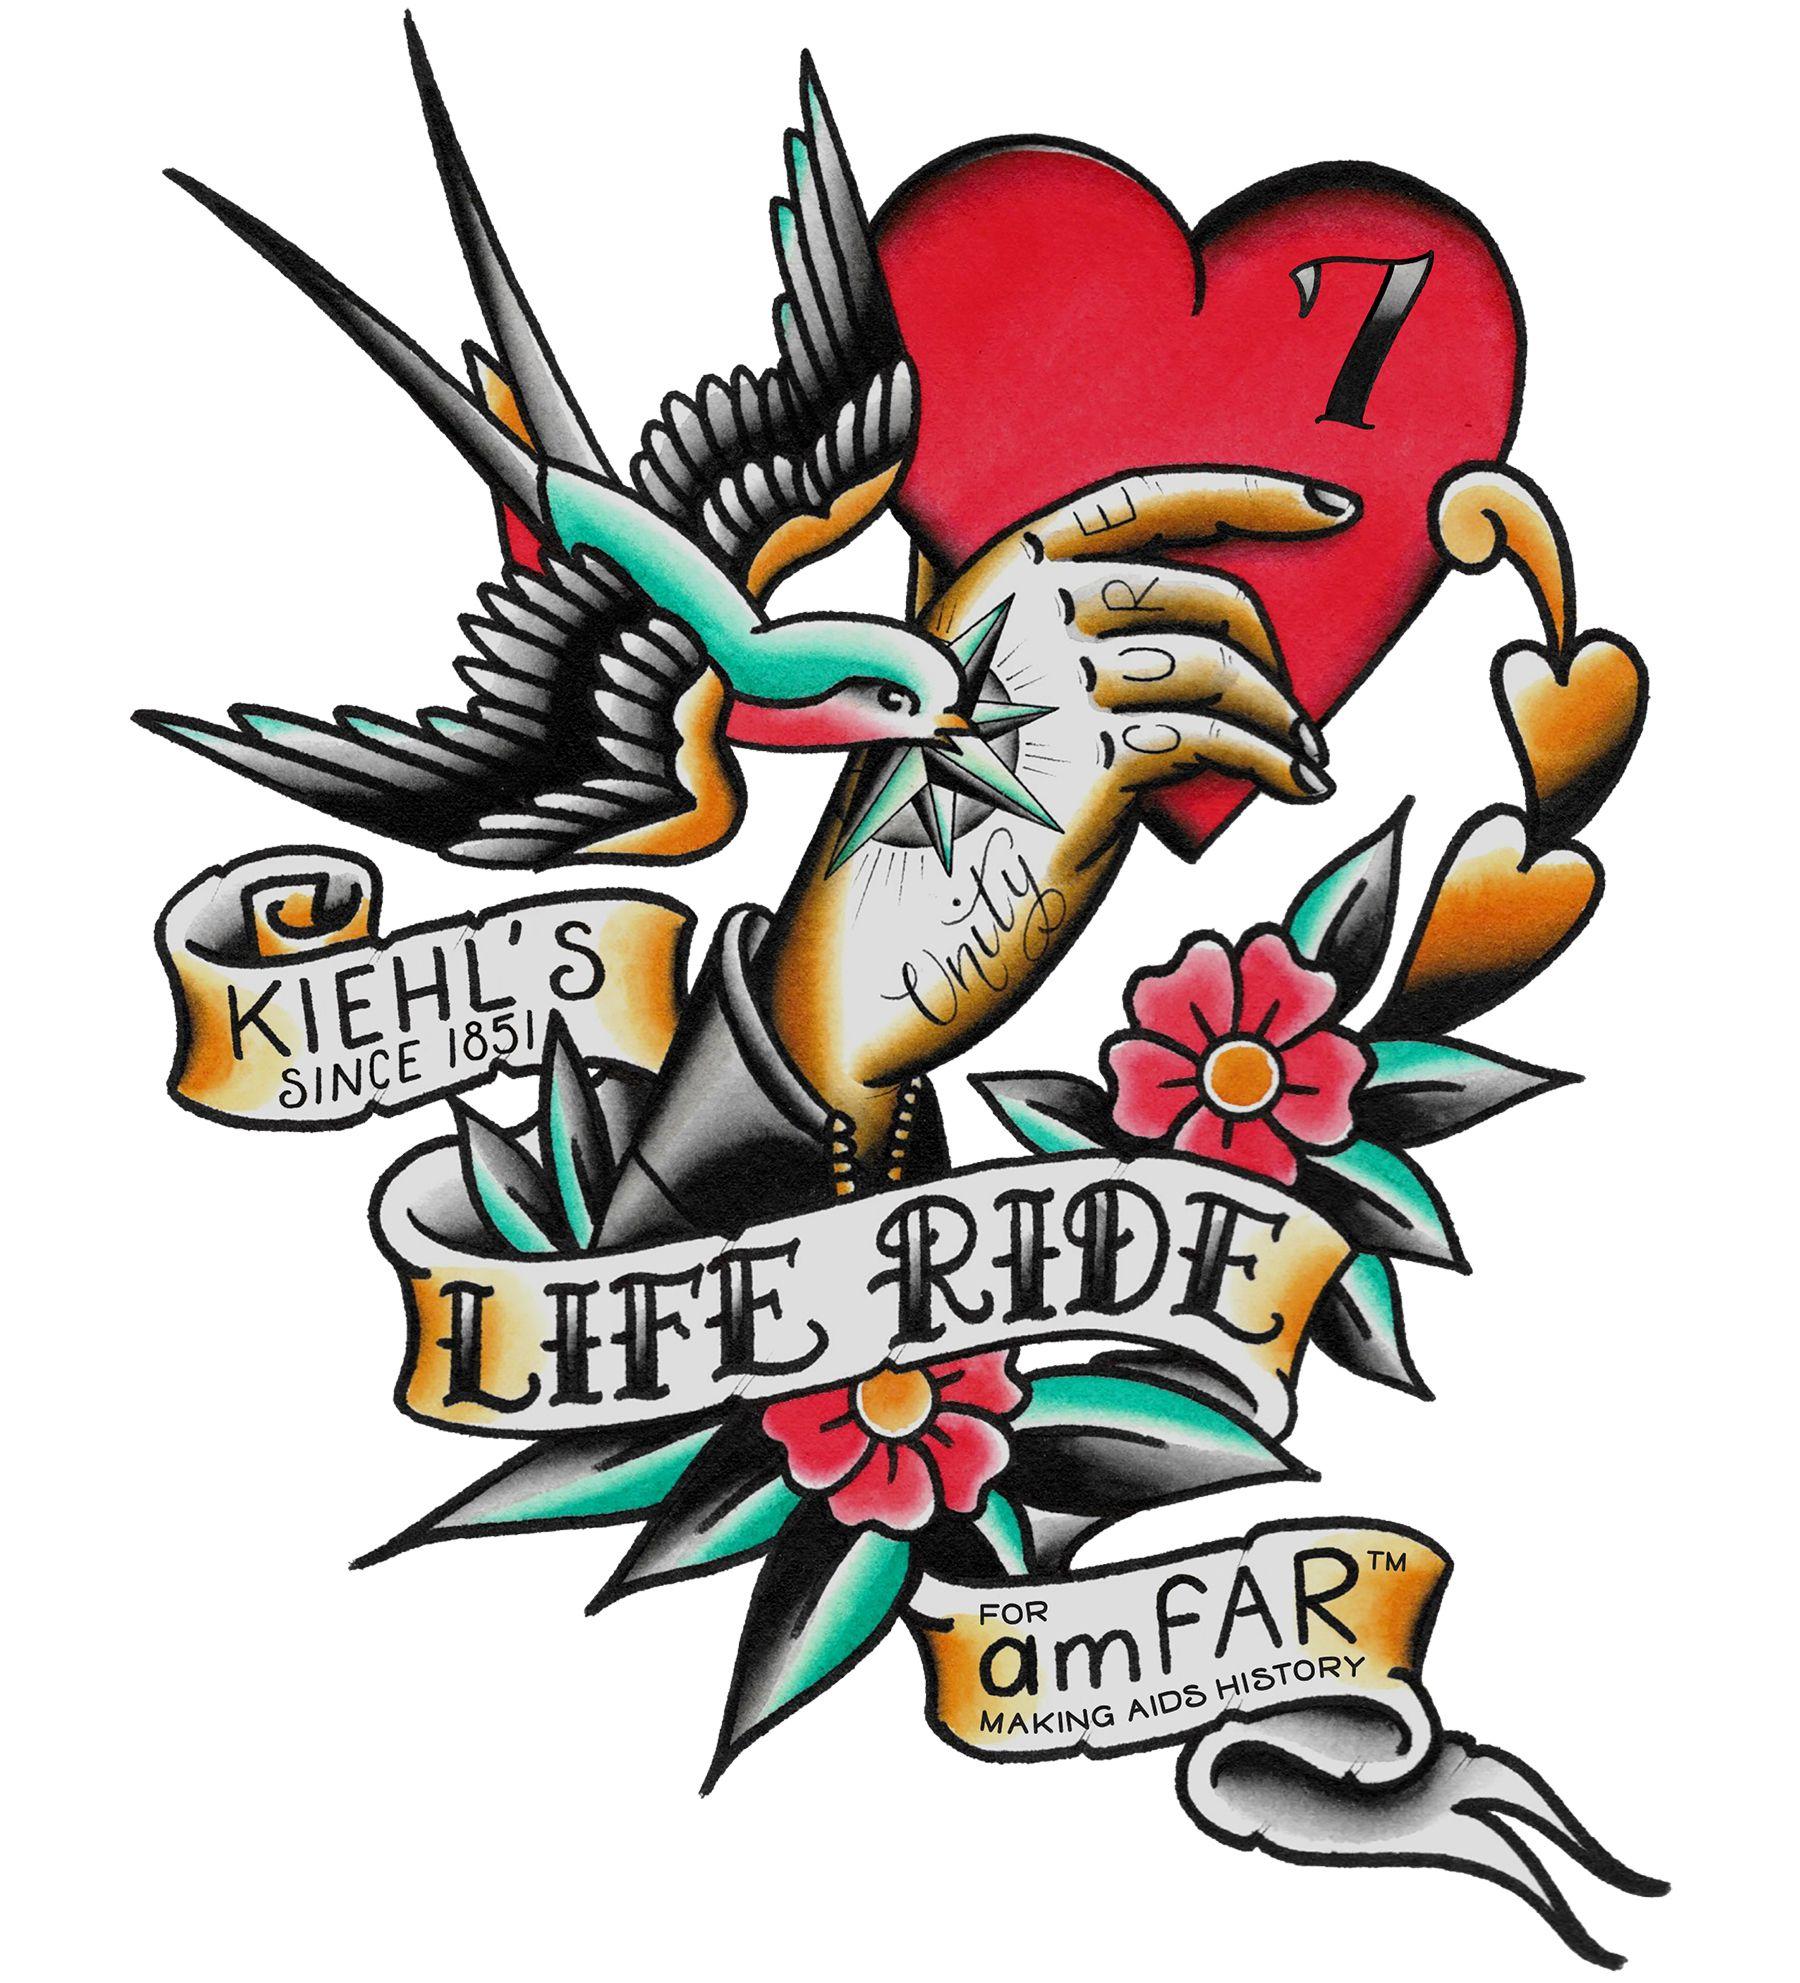 Kiehl's Logo - KIEHL'S PARTNERS WITH RXART TO LAUNCH 7TH ANNUAL LIFERIDE FOR amfAR